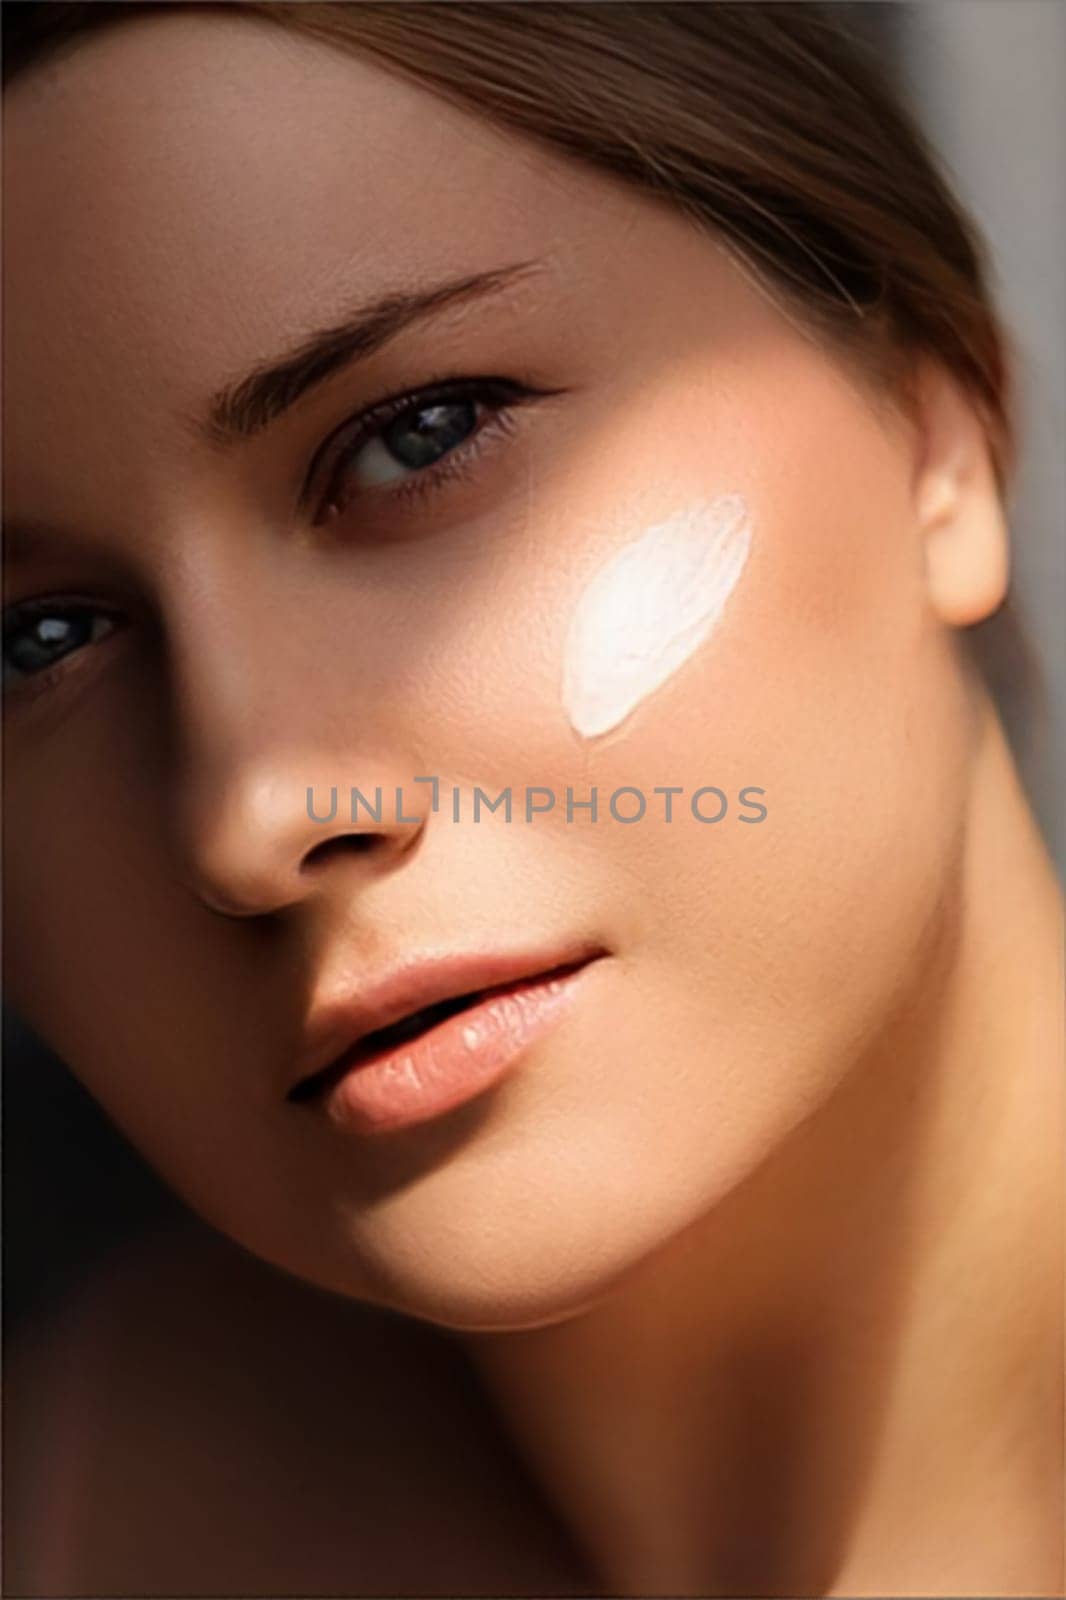 Beauty, suntan spf and skincare cosmetics model face portrait, woman with moisturising cream, sunscreen product or sun tan lotion on her cheek, luxury facial and skin care ad by Anneleven